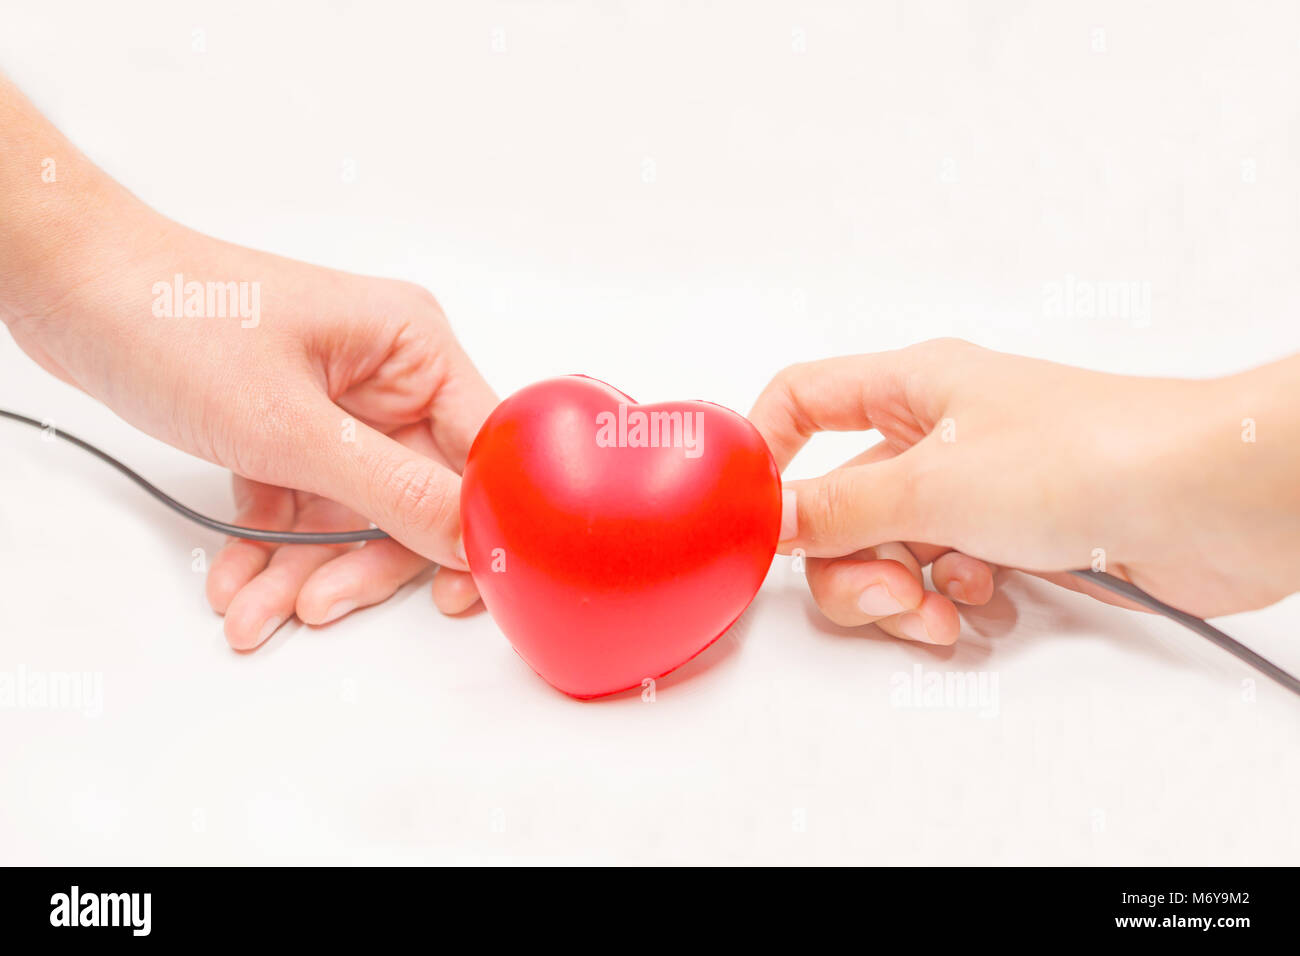 Hands with charging cables to help recovering heart on white background. Heart disease protection, proactive checkup, diagnosis, sickness prevention,  Stock Photo